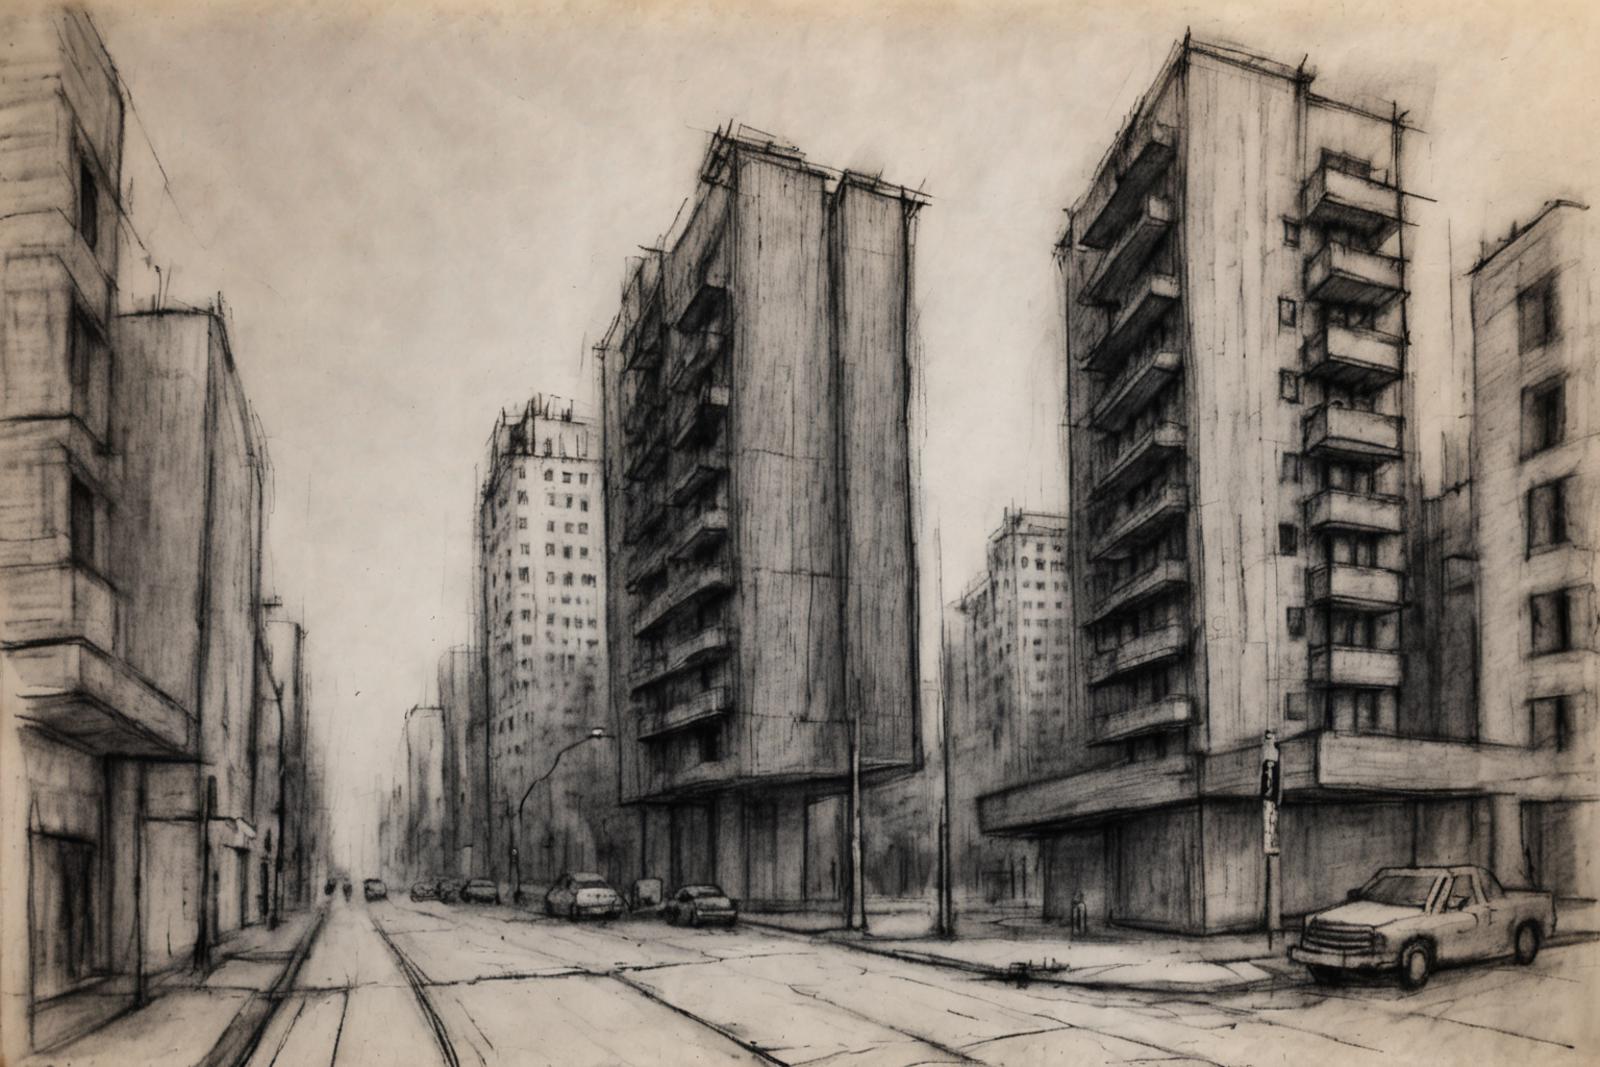 A black and white drawing of a city street with tall buildings, cars, and people.